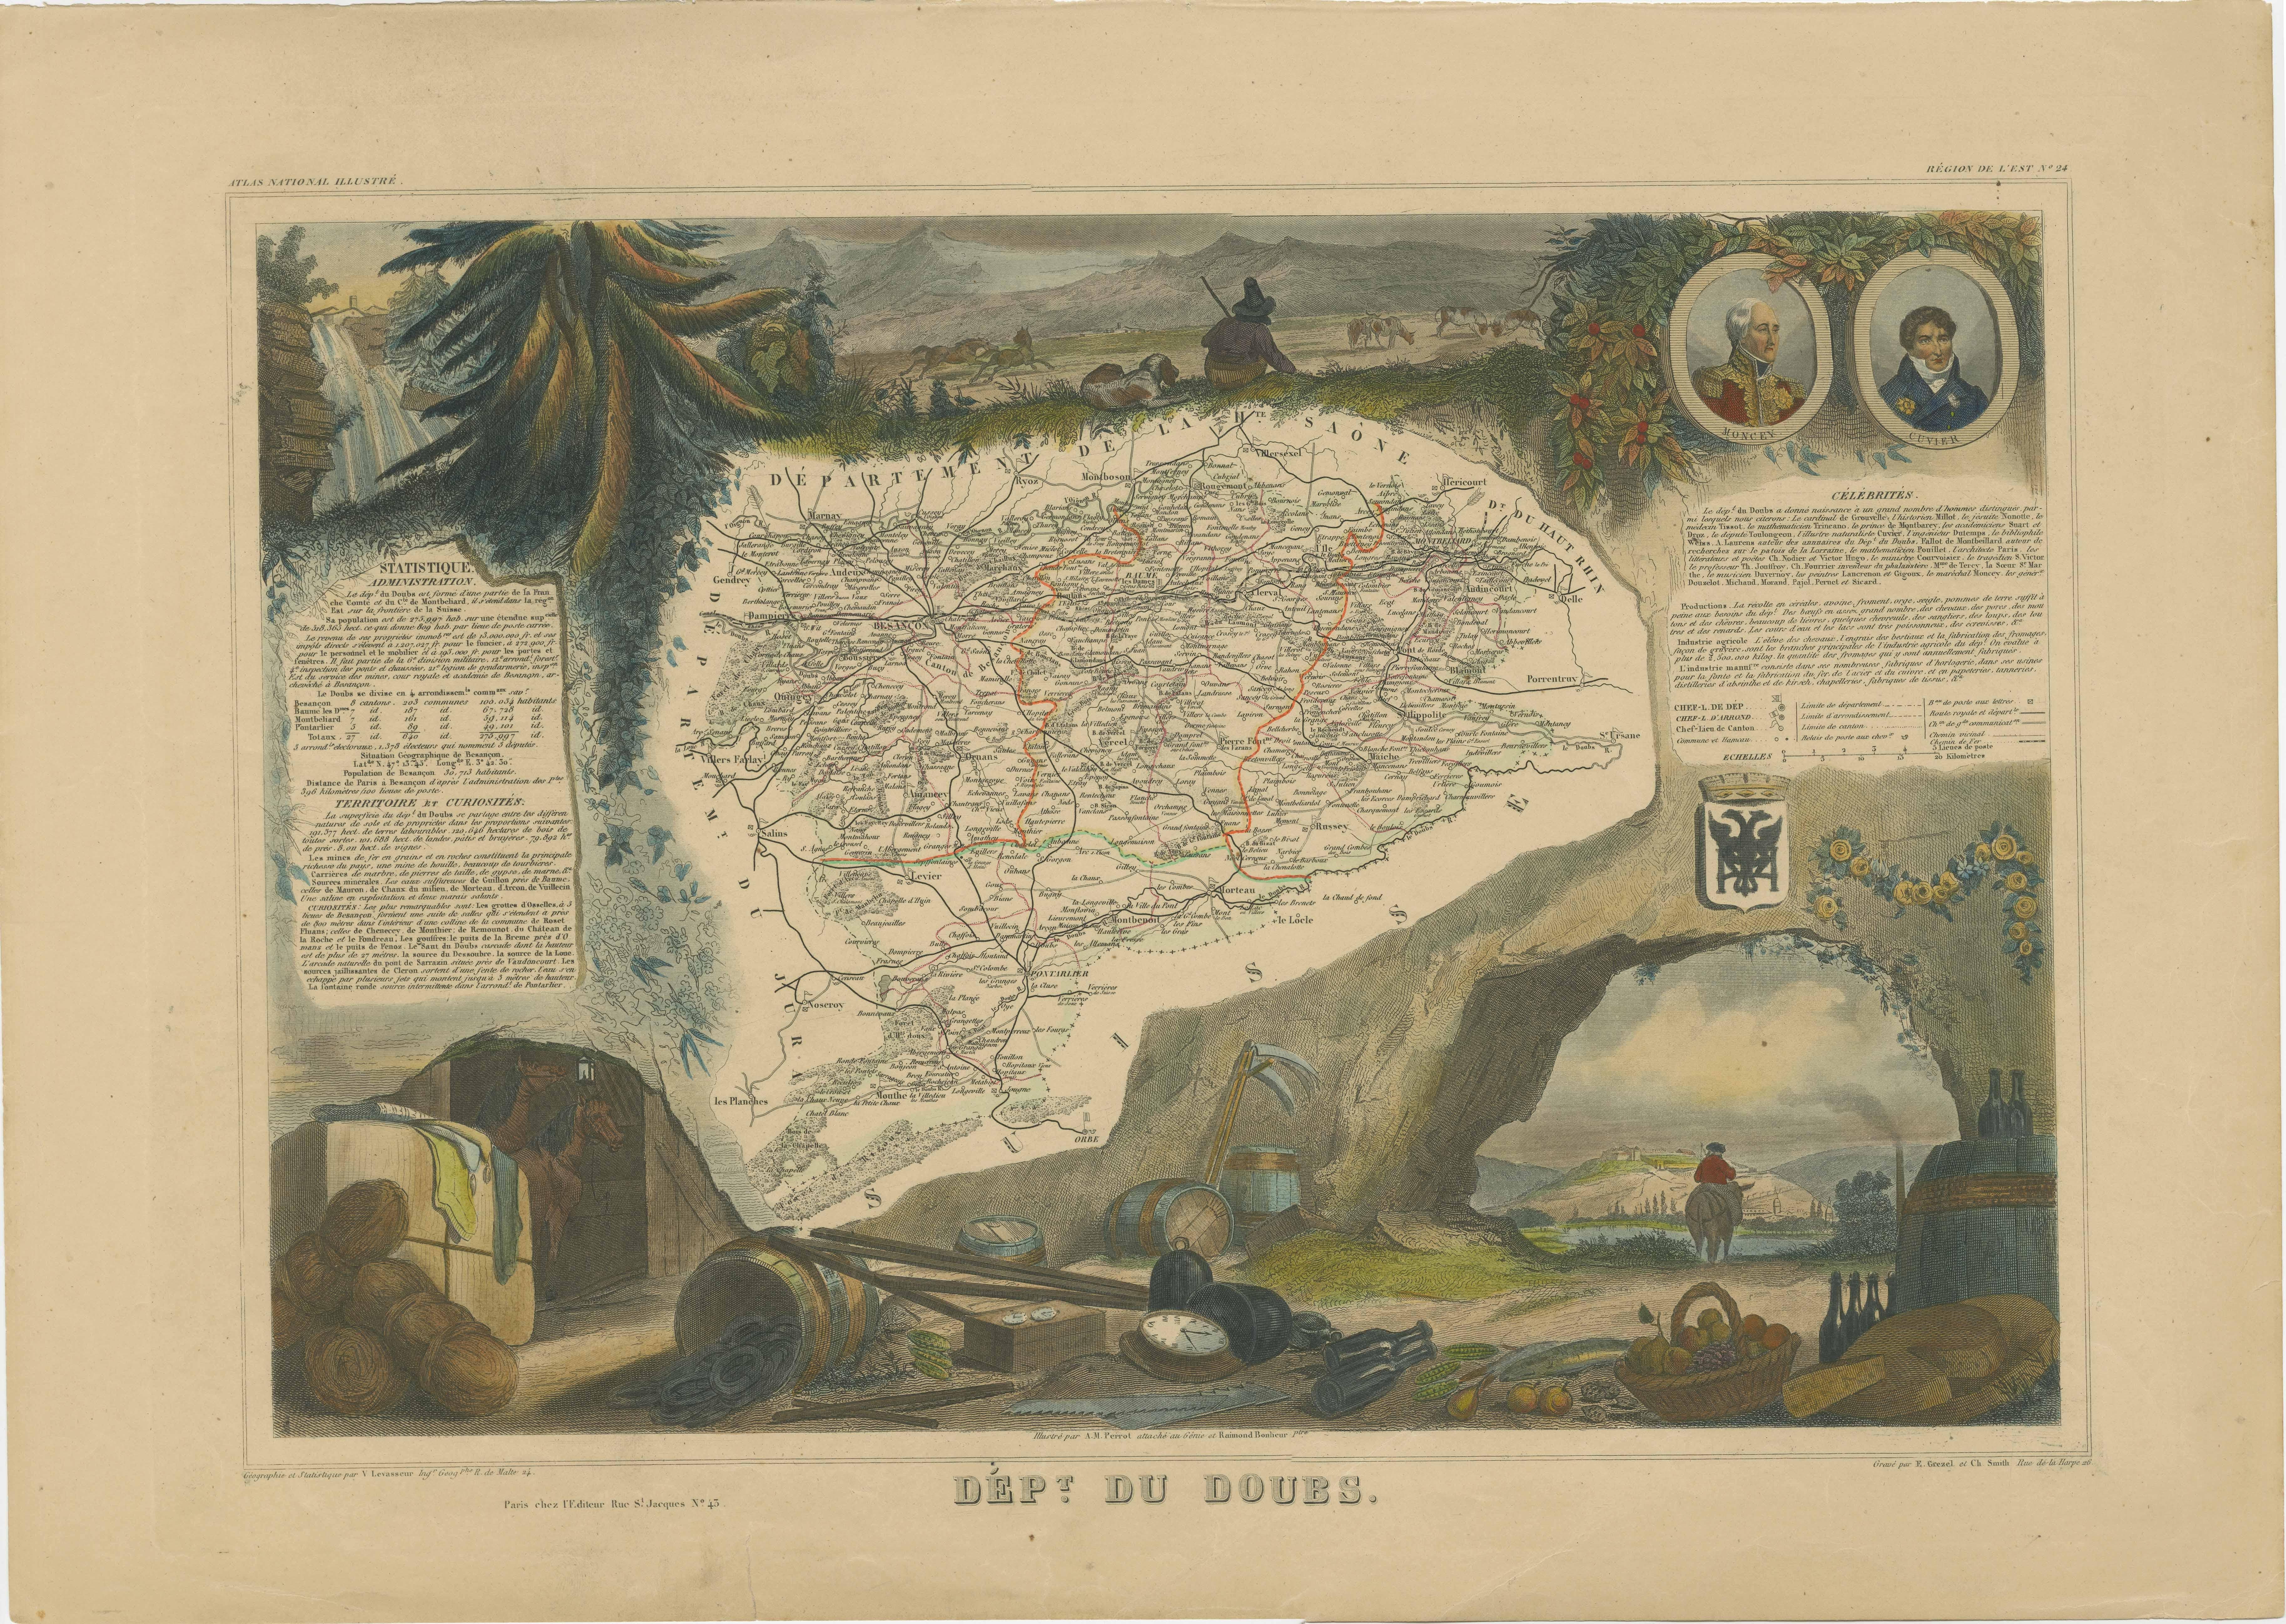 Antique map titled 'Dépt. du Doubs'. Map of the French department of Doubs, France. The whole is surrounded by elaborate decorative engravings designed to illustrate both the natural beauty and trade richness of the land. There is a short textual